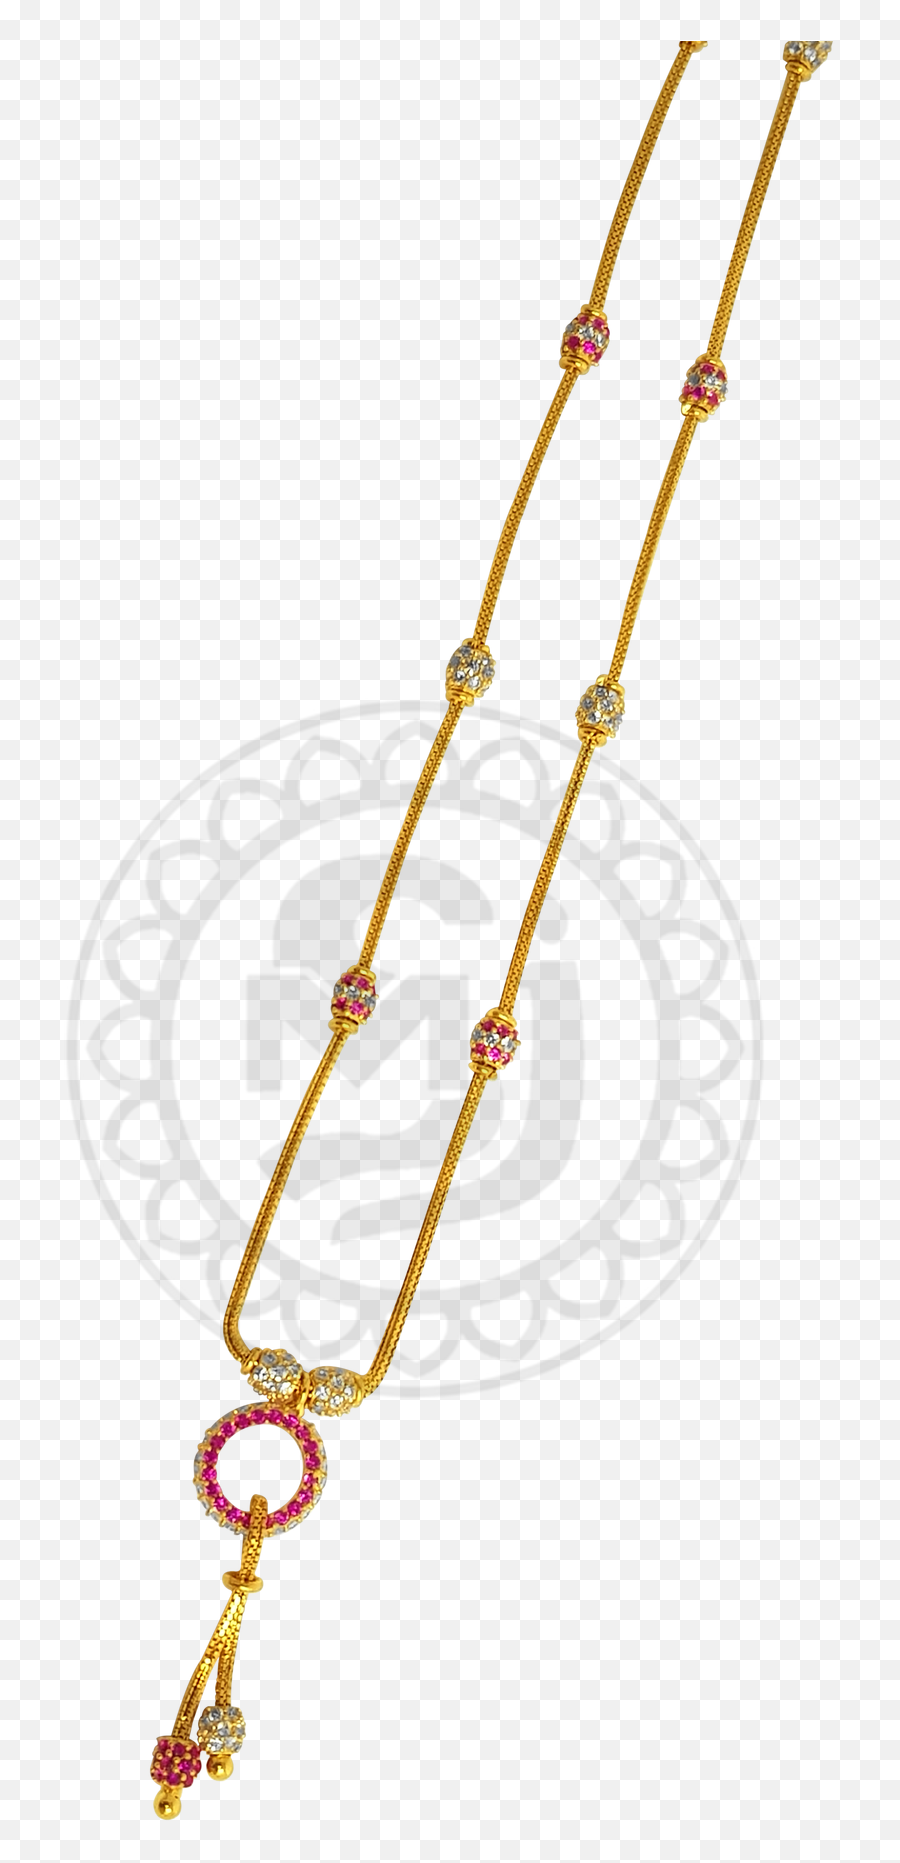 Download Hd Gold Chains - 221225 Chain Transparent Png Image Illustration,Gold Chains Png